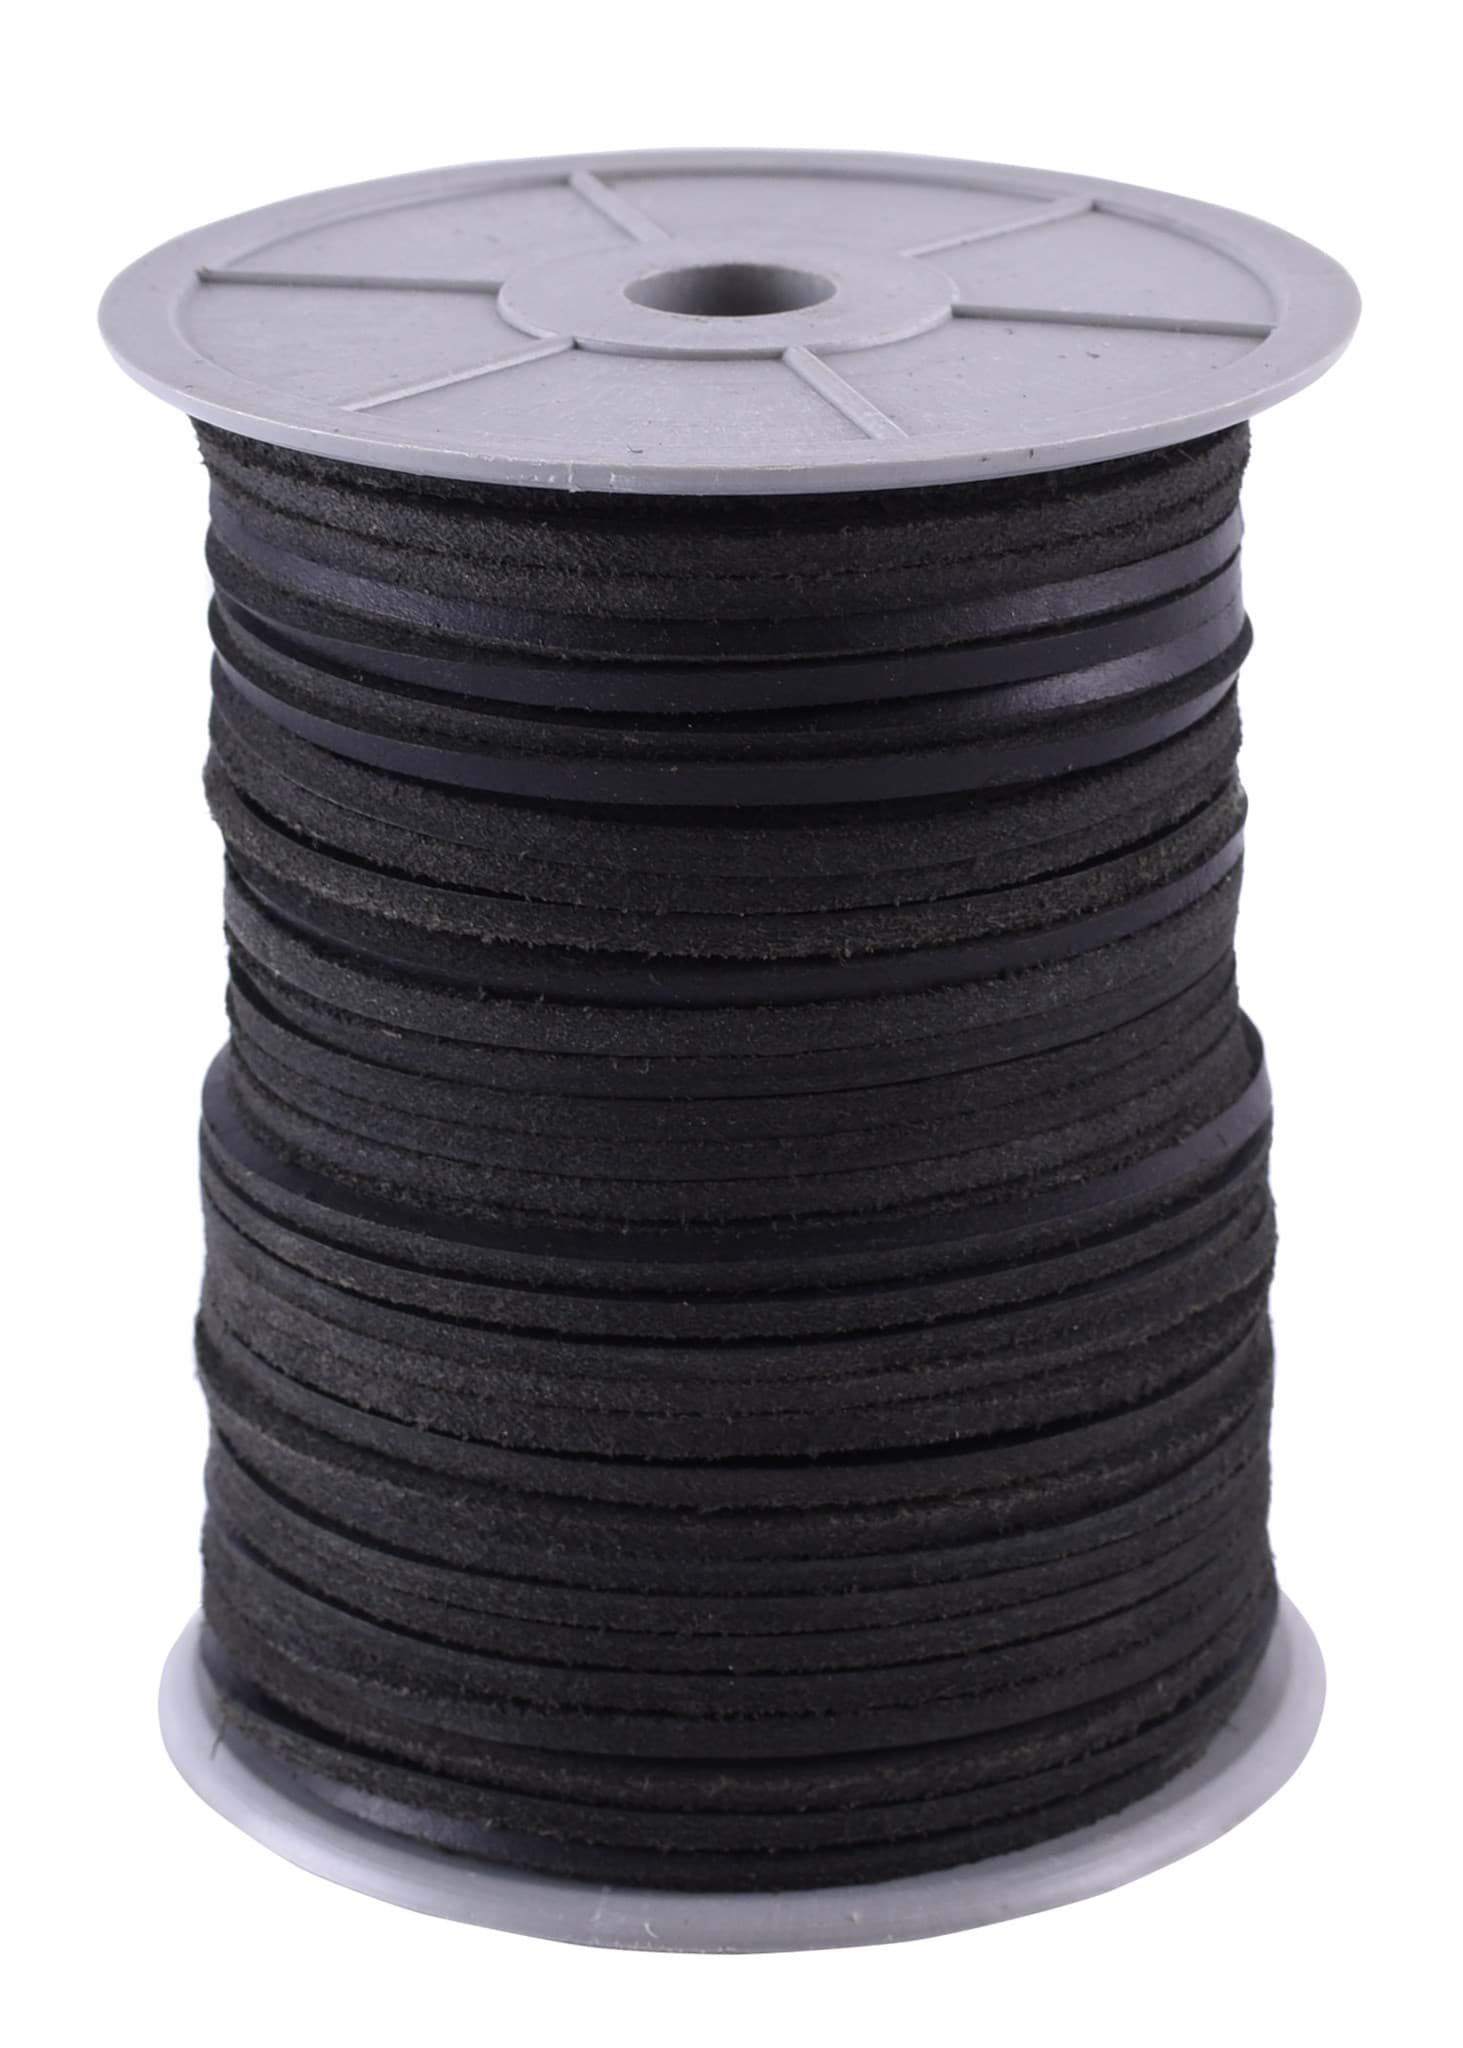 Picture of Battle Merchant - Square Leather Cord 28 mm 50 m Roll Black